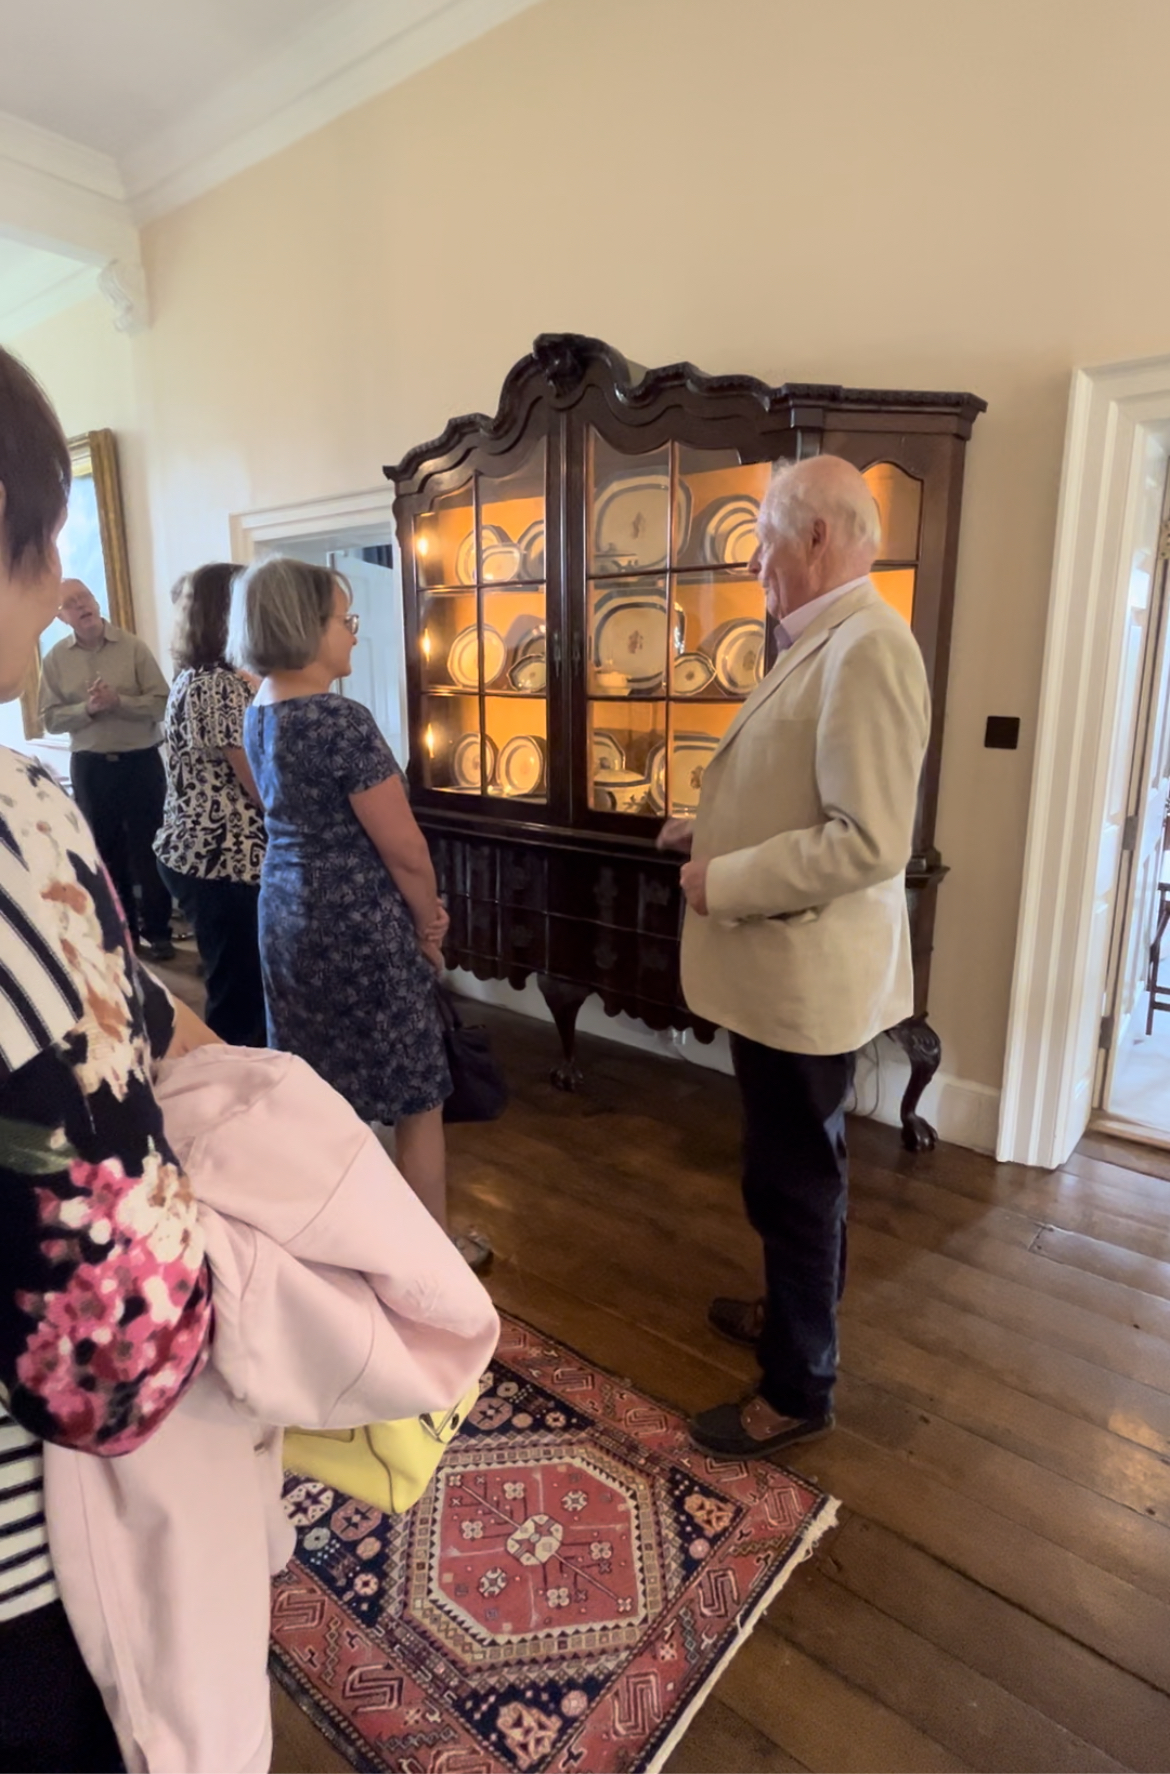 A review and round up of a personal house tour around Iscoyd Park in association with Historic Houses hosted by the resident Godsal family.